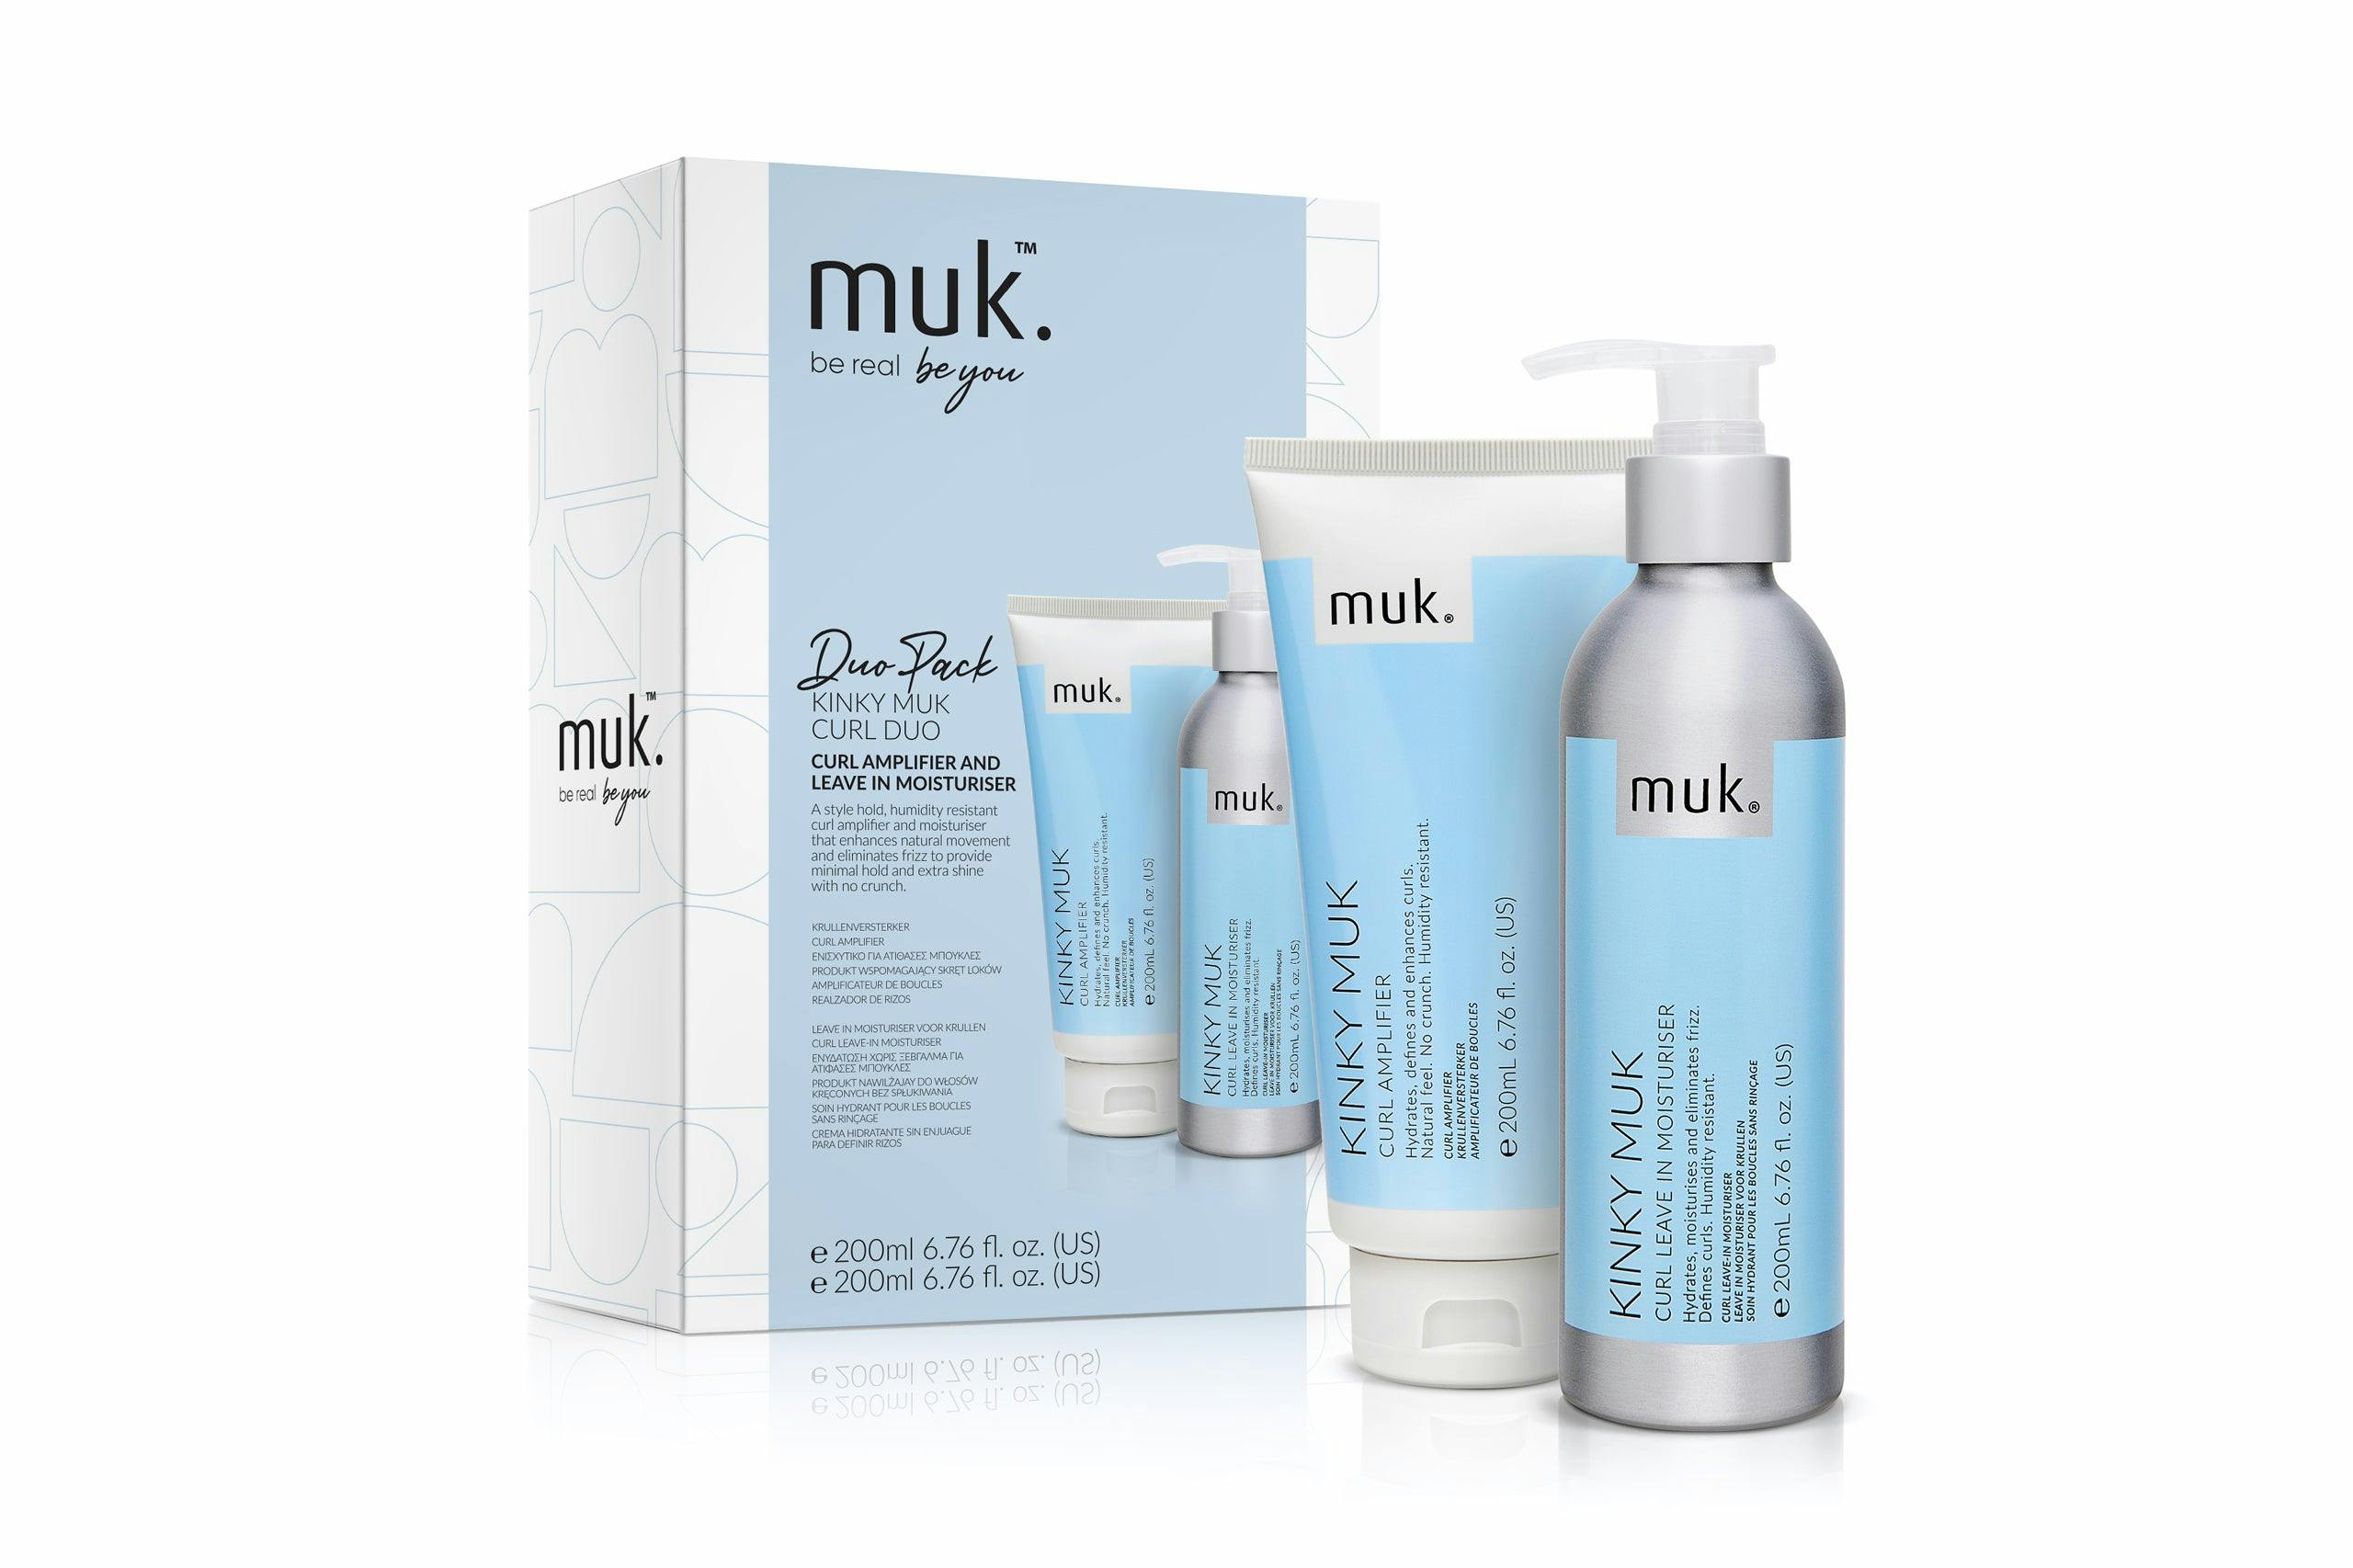 Muk Kinky Muk Curl Leave in Moisturiser and Curl Amplifier 200ml Duo Pack